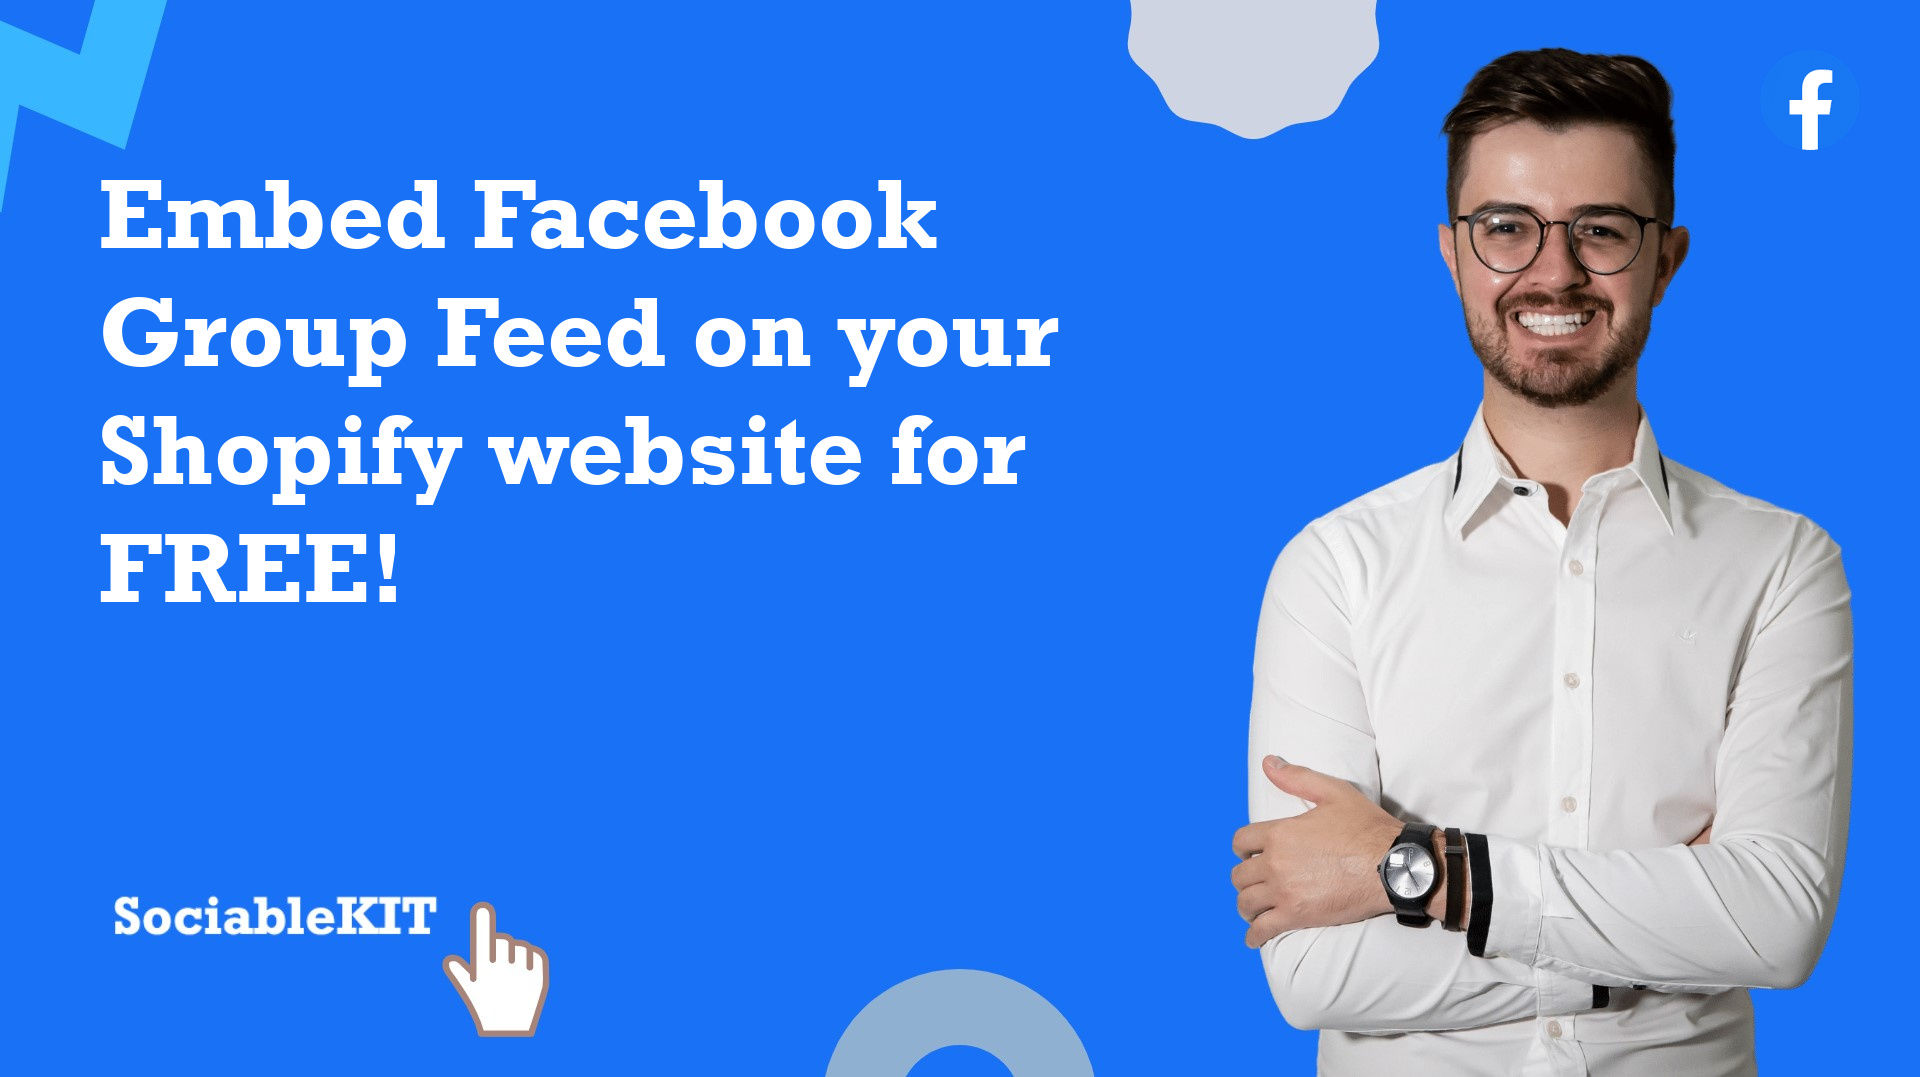 How to embed Facebook Group Feed on your Shopify website for FREE?